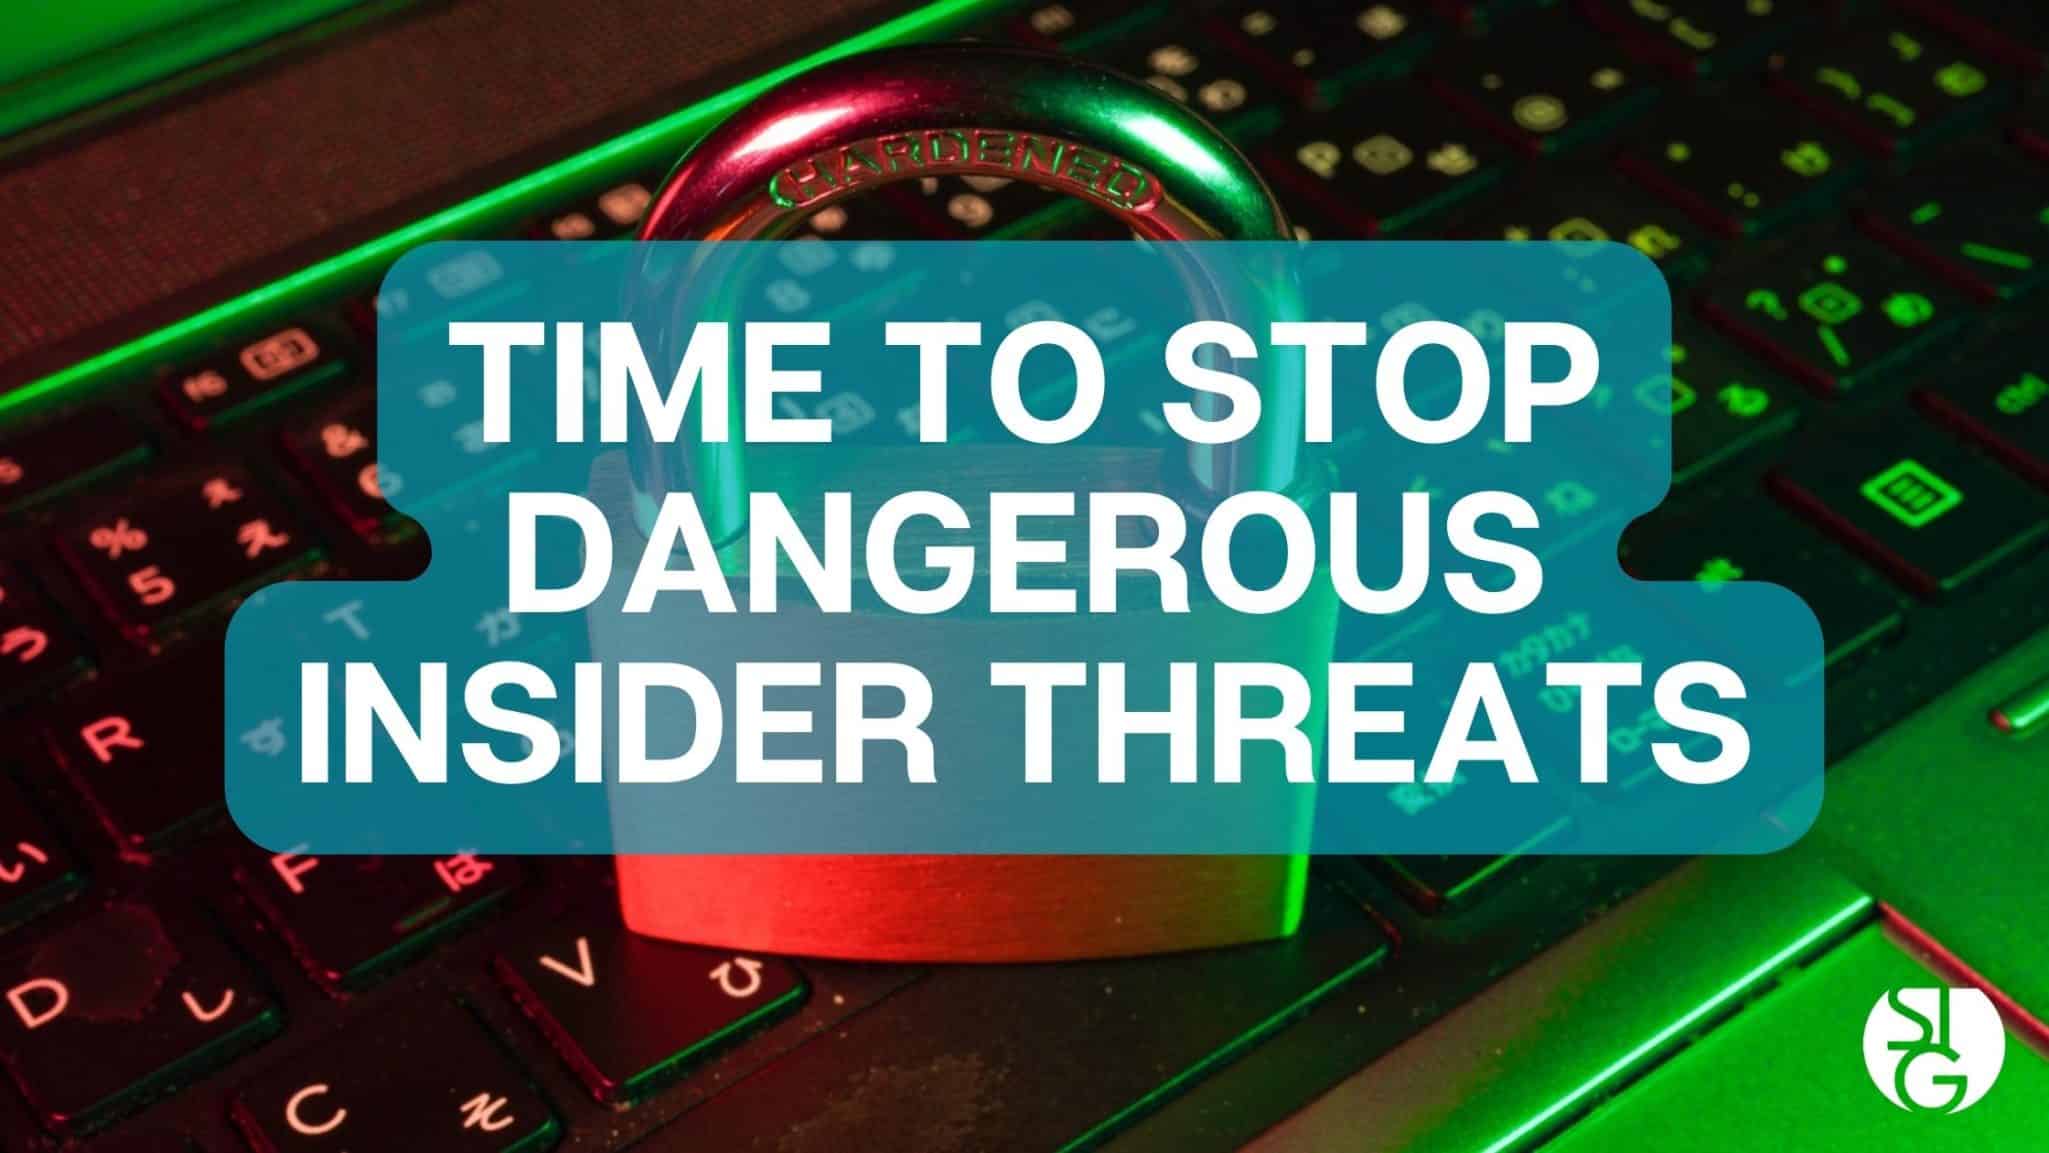 How to Stop Dangerous Insider Threats